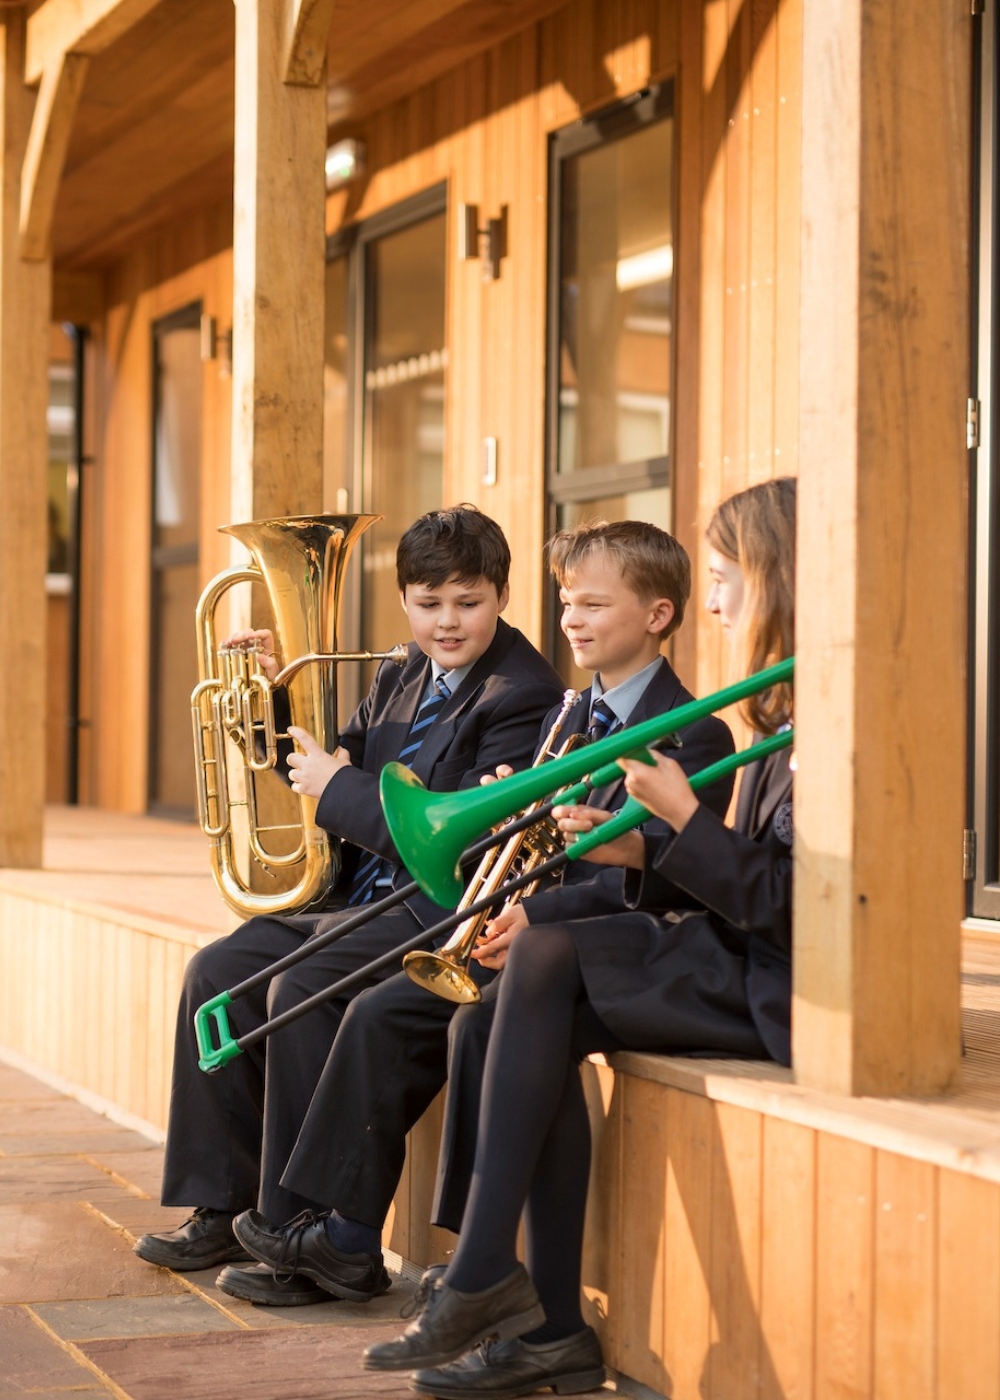 Senior pupils sitting with their musical instruments at Ibstock Place School, a private school near Richmond, Barnes, Putney, Kingston, and Wandsworth